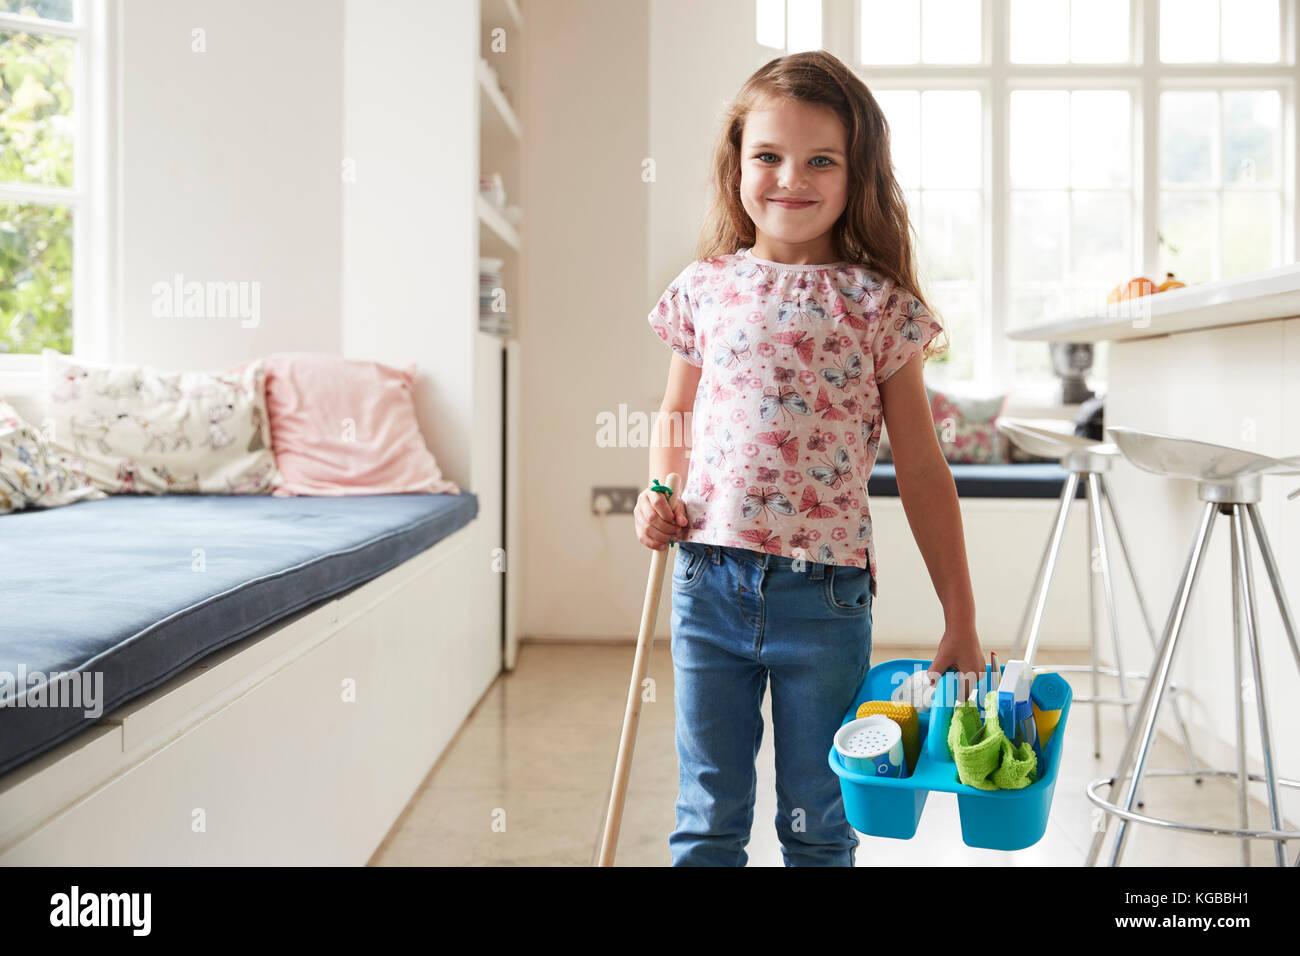 Young girl standing at home with broom and cleaning products Stock Photo